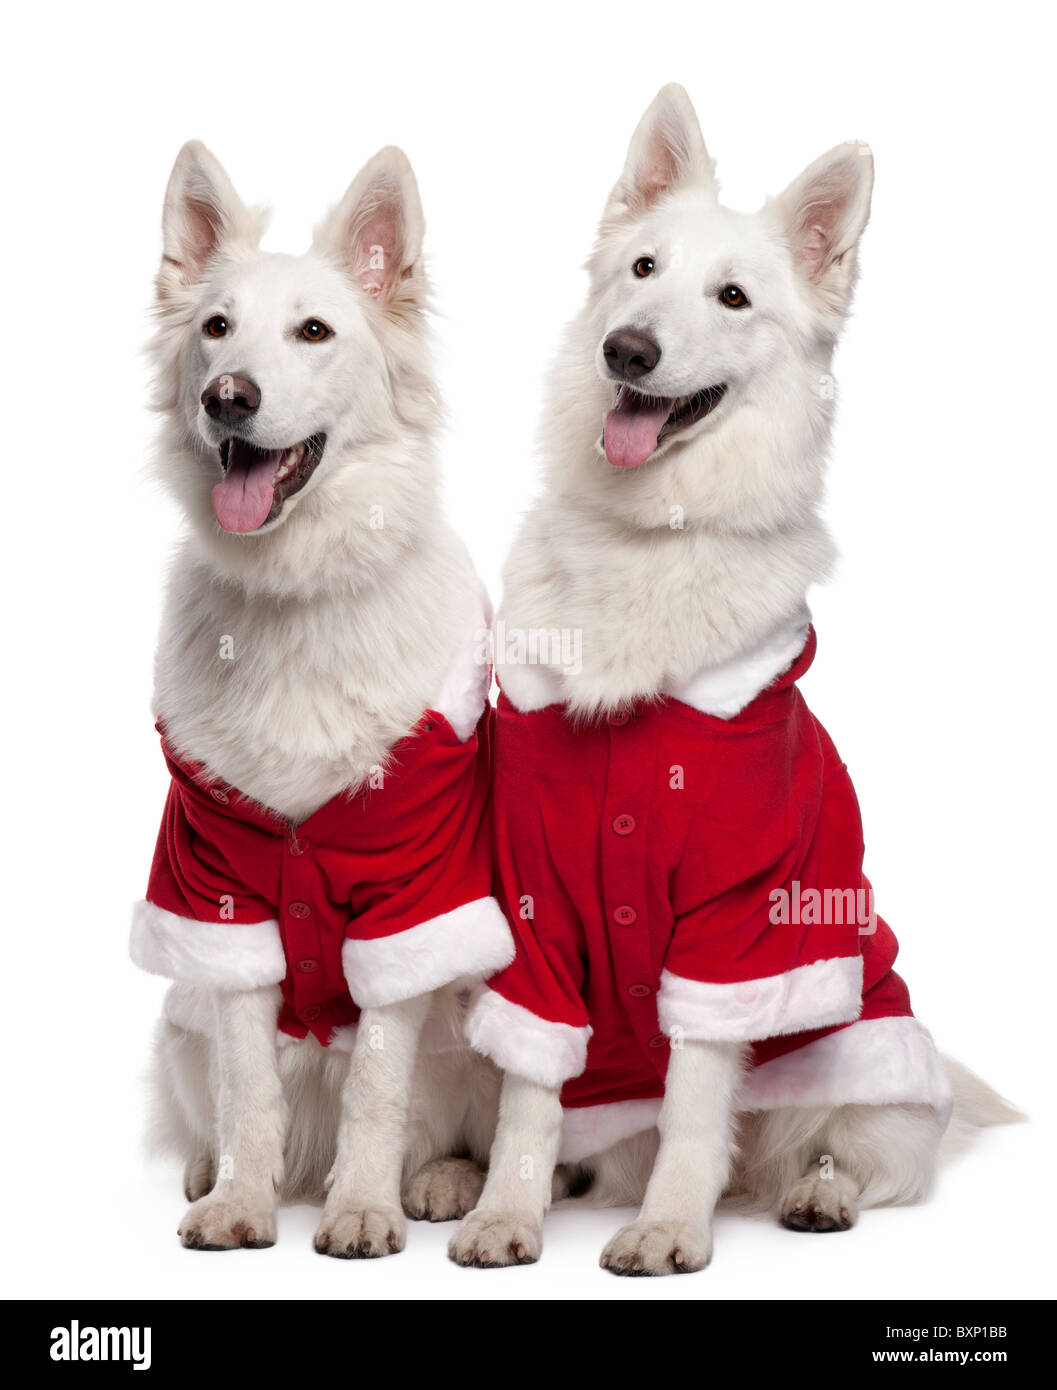 Berger Blanc Suisse or White Swiss Shepherd Dogs wearing Santa oufit, 2 years old, in front of white background Stock Photo